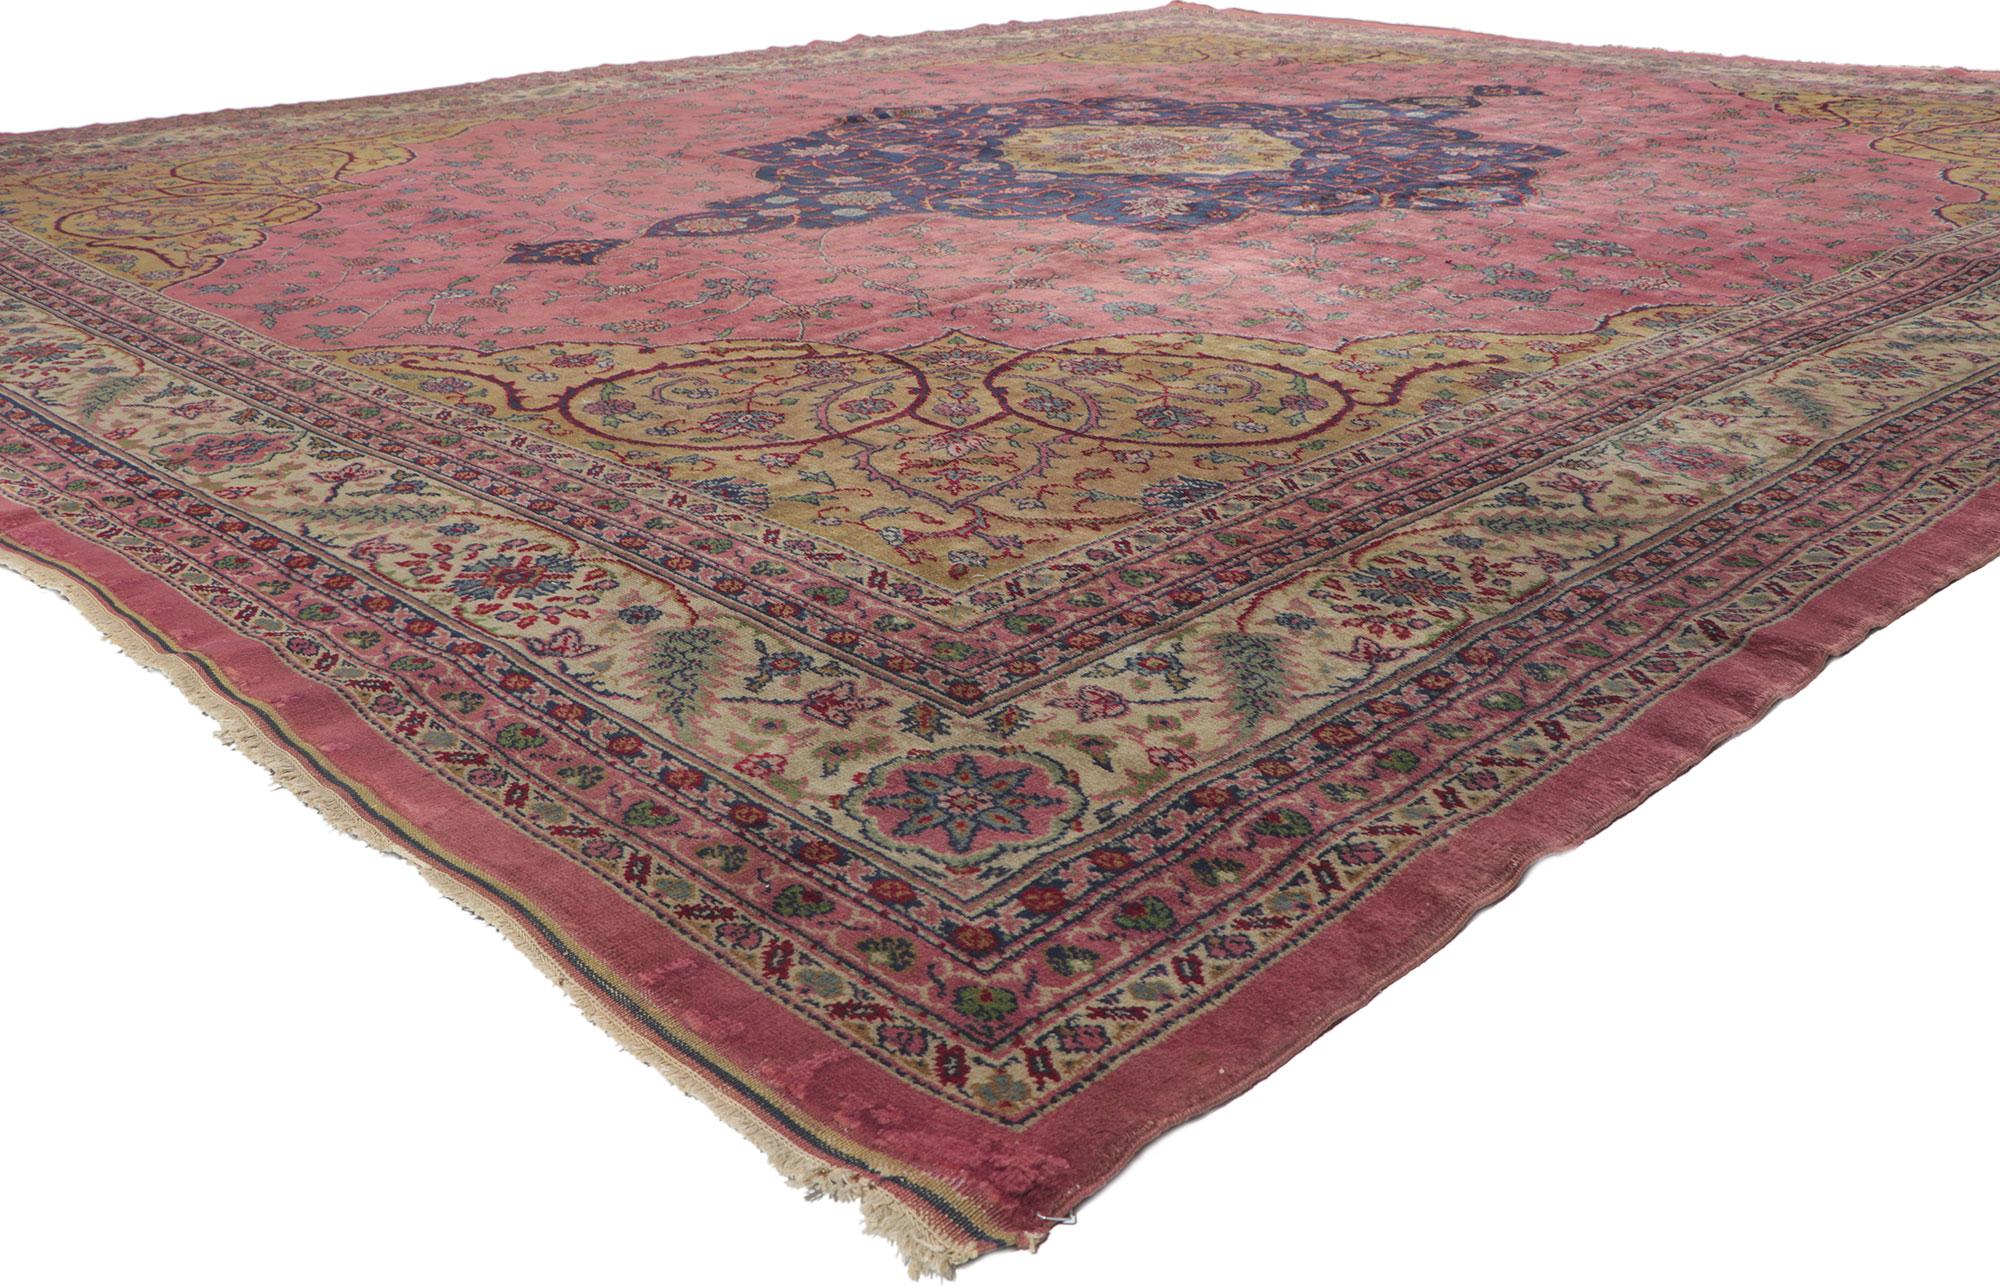 71617 Antique Turkish Sparta Rug, 13'00 x 15'00. In the mystical town of Sparta nestled within Turkey's southwestern expanse, Turkish Sparta rugs embody an enchanting narrative of heritage and allure. Delicate geometric patterns, floral motifs, and